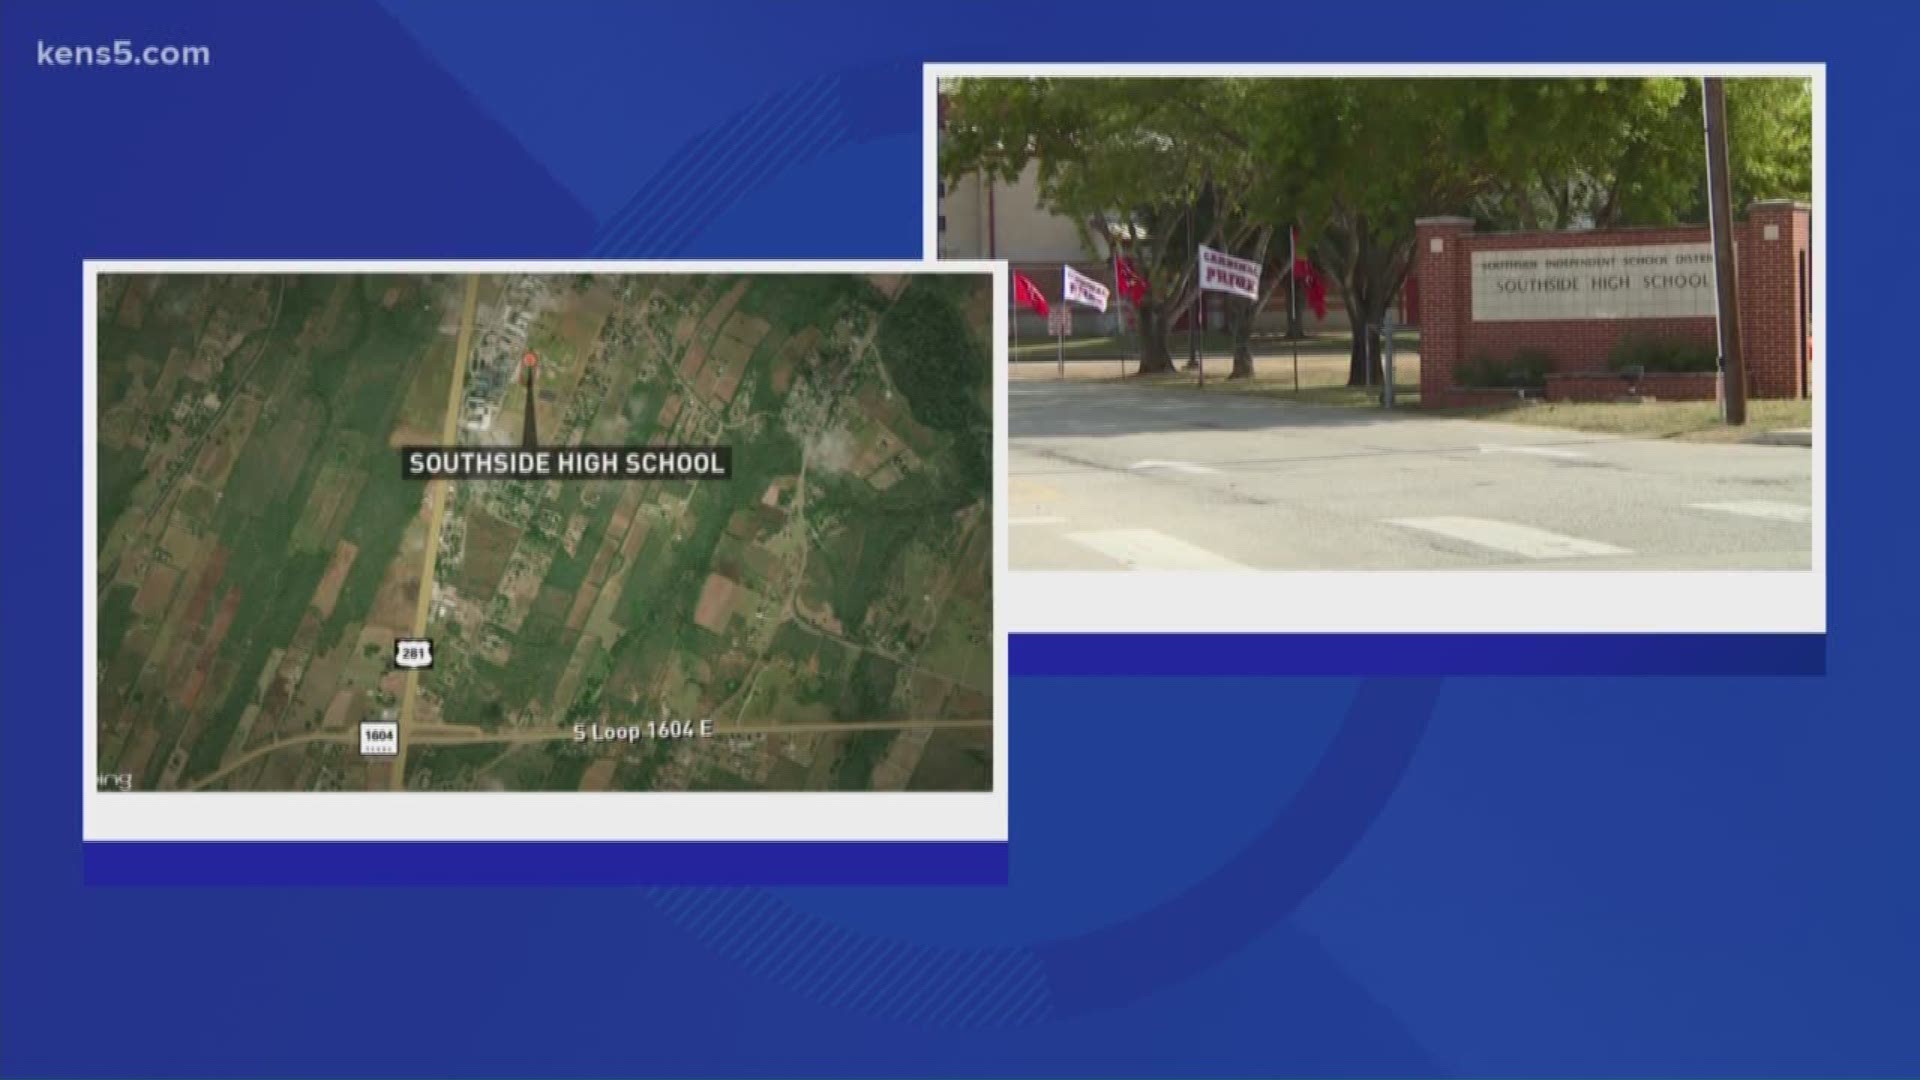 The unidentified student apparently left the firearm in a storm drain on campus, Southside High School's principal said in a letter to parents.